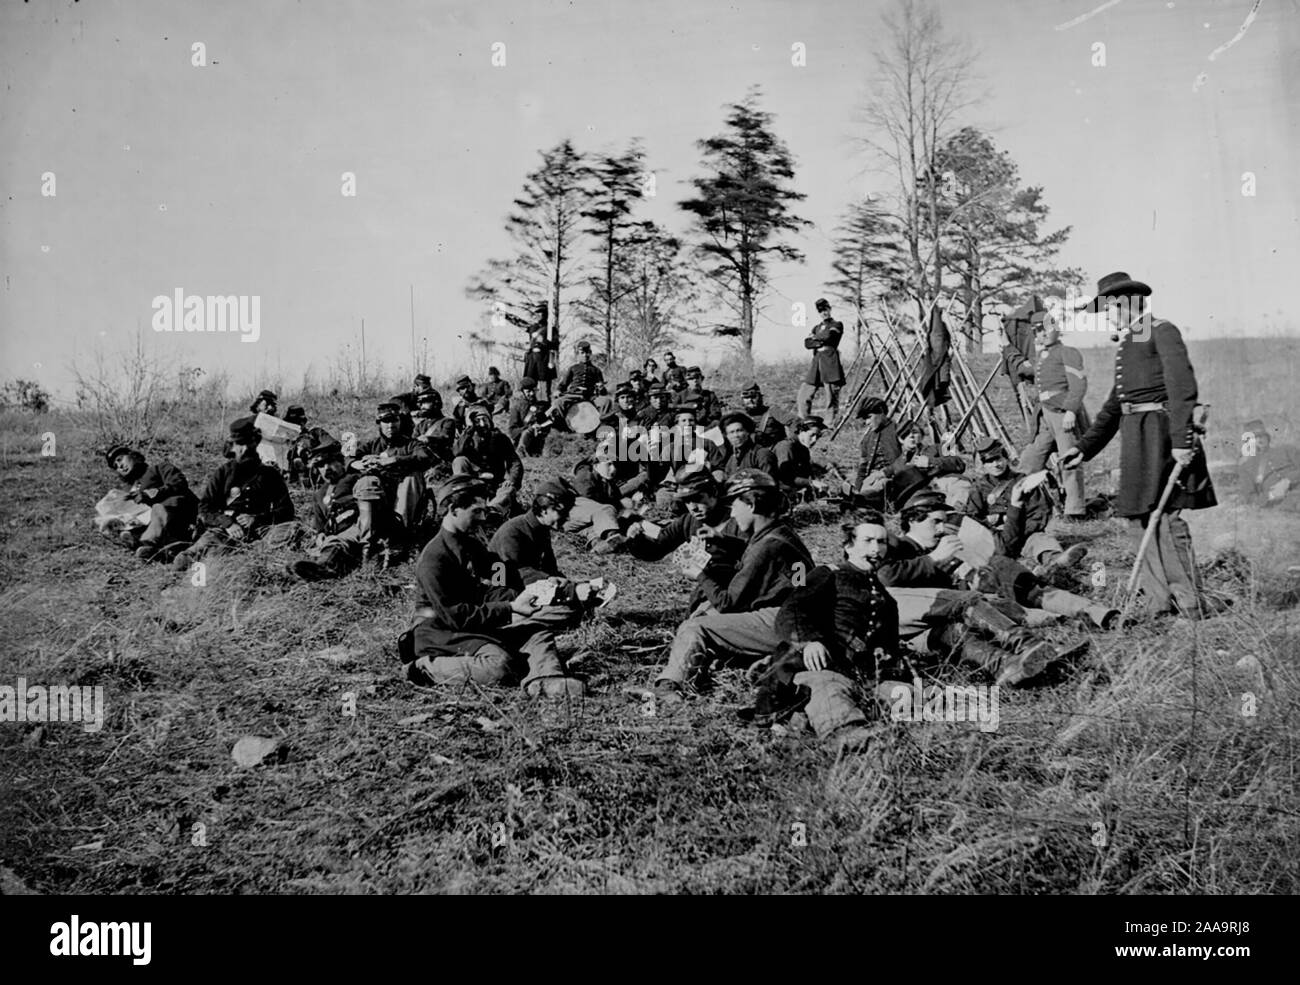 Civil War soldiers at rest after drill, Petersburg, Va., 1864. The soldiers are seated reading letters and papers and playing cards. Stock Photo